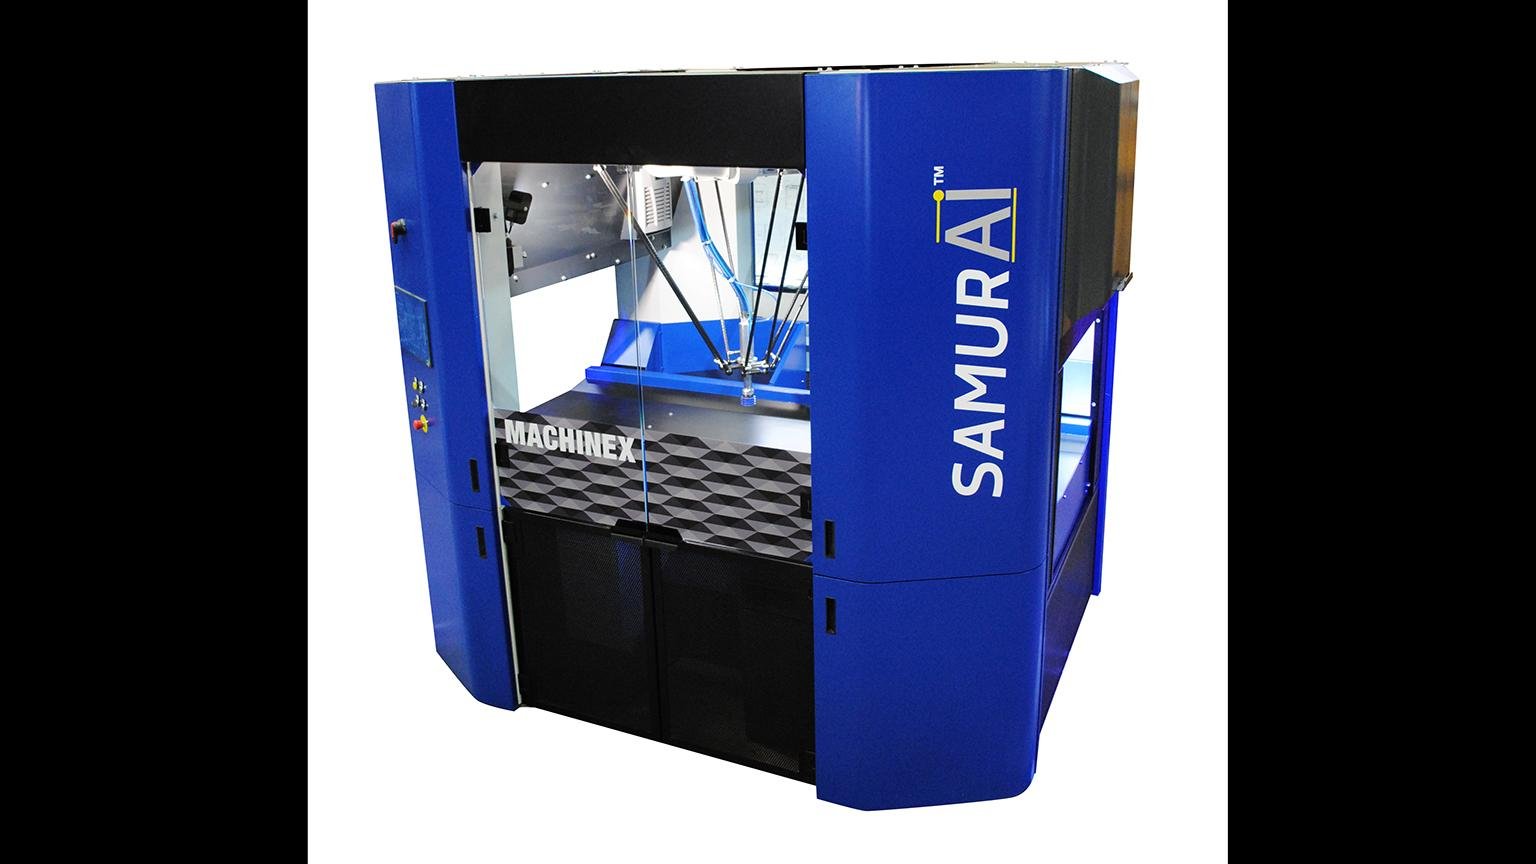 The SamurAI sorting robot, manufactured by Canada’s Machinex Technologies. (Courtesy Lakeshore Recycling Systems)